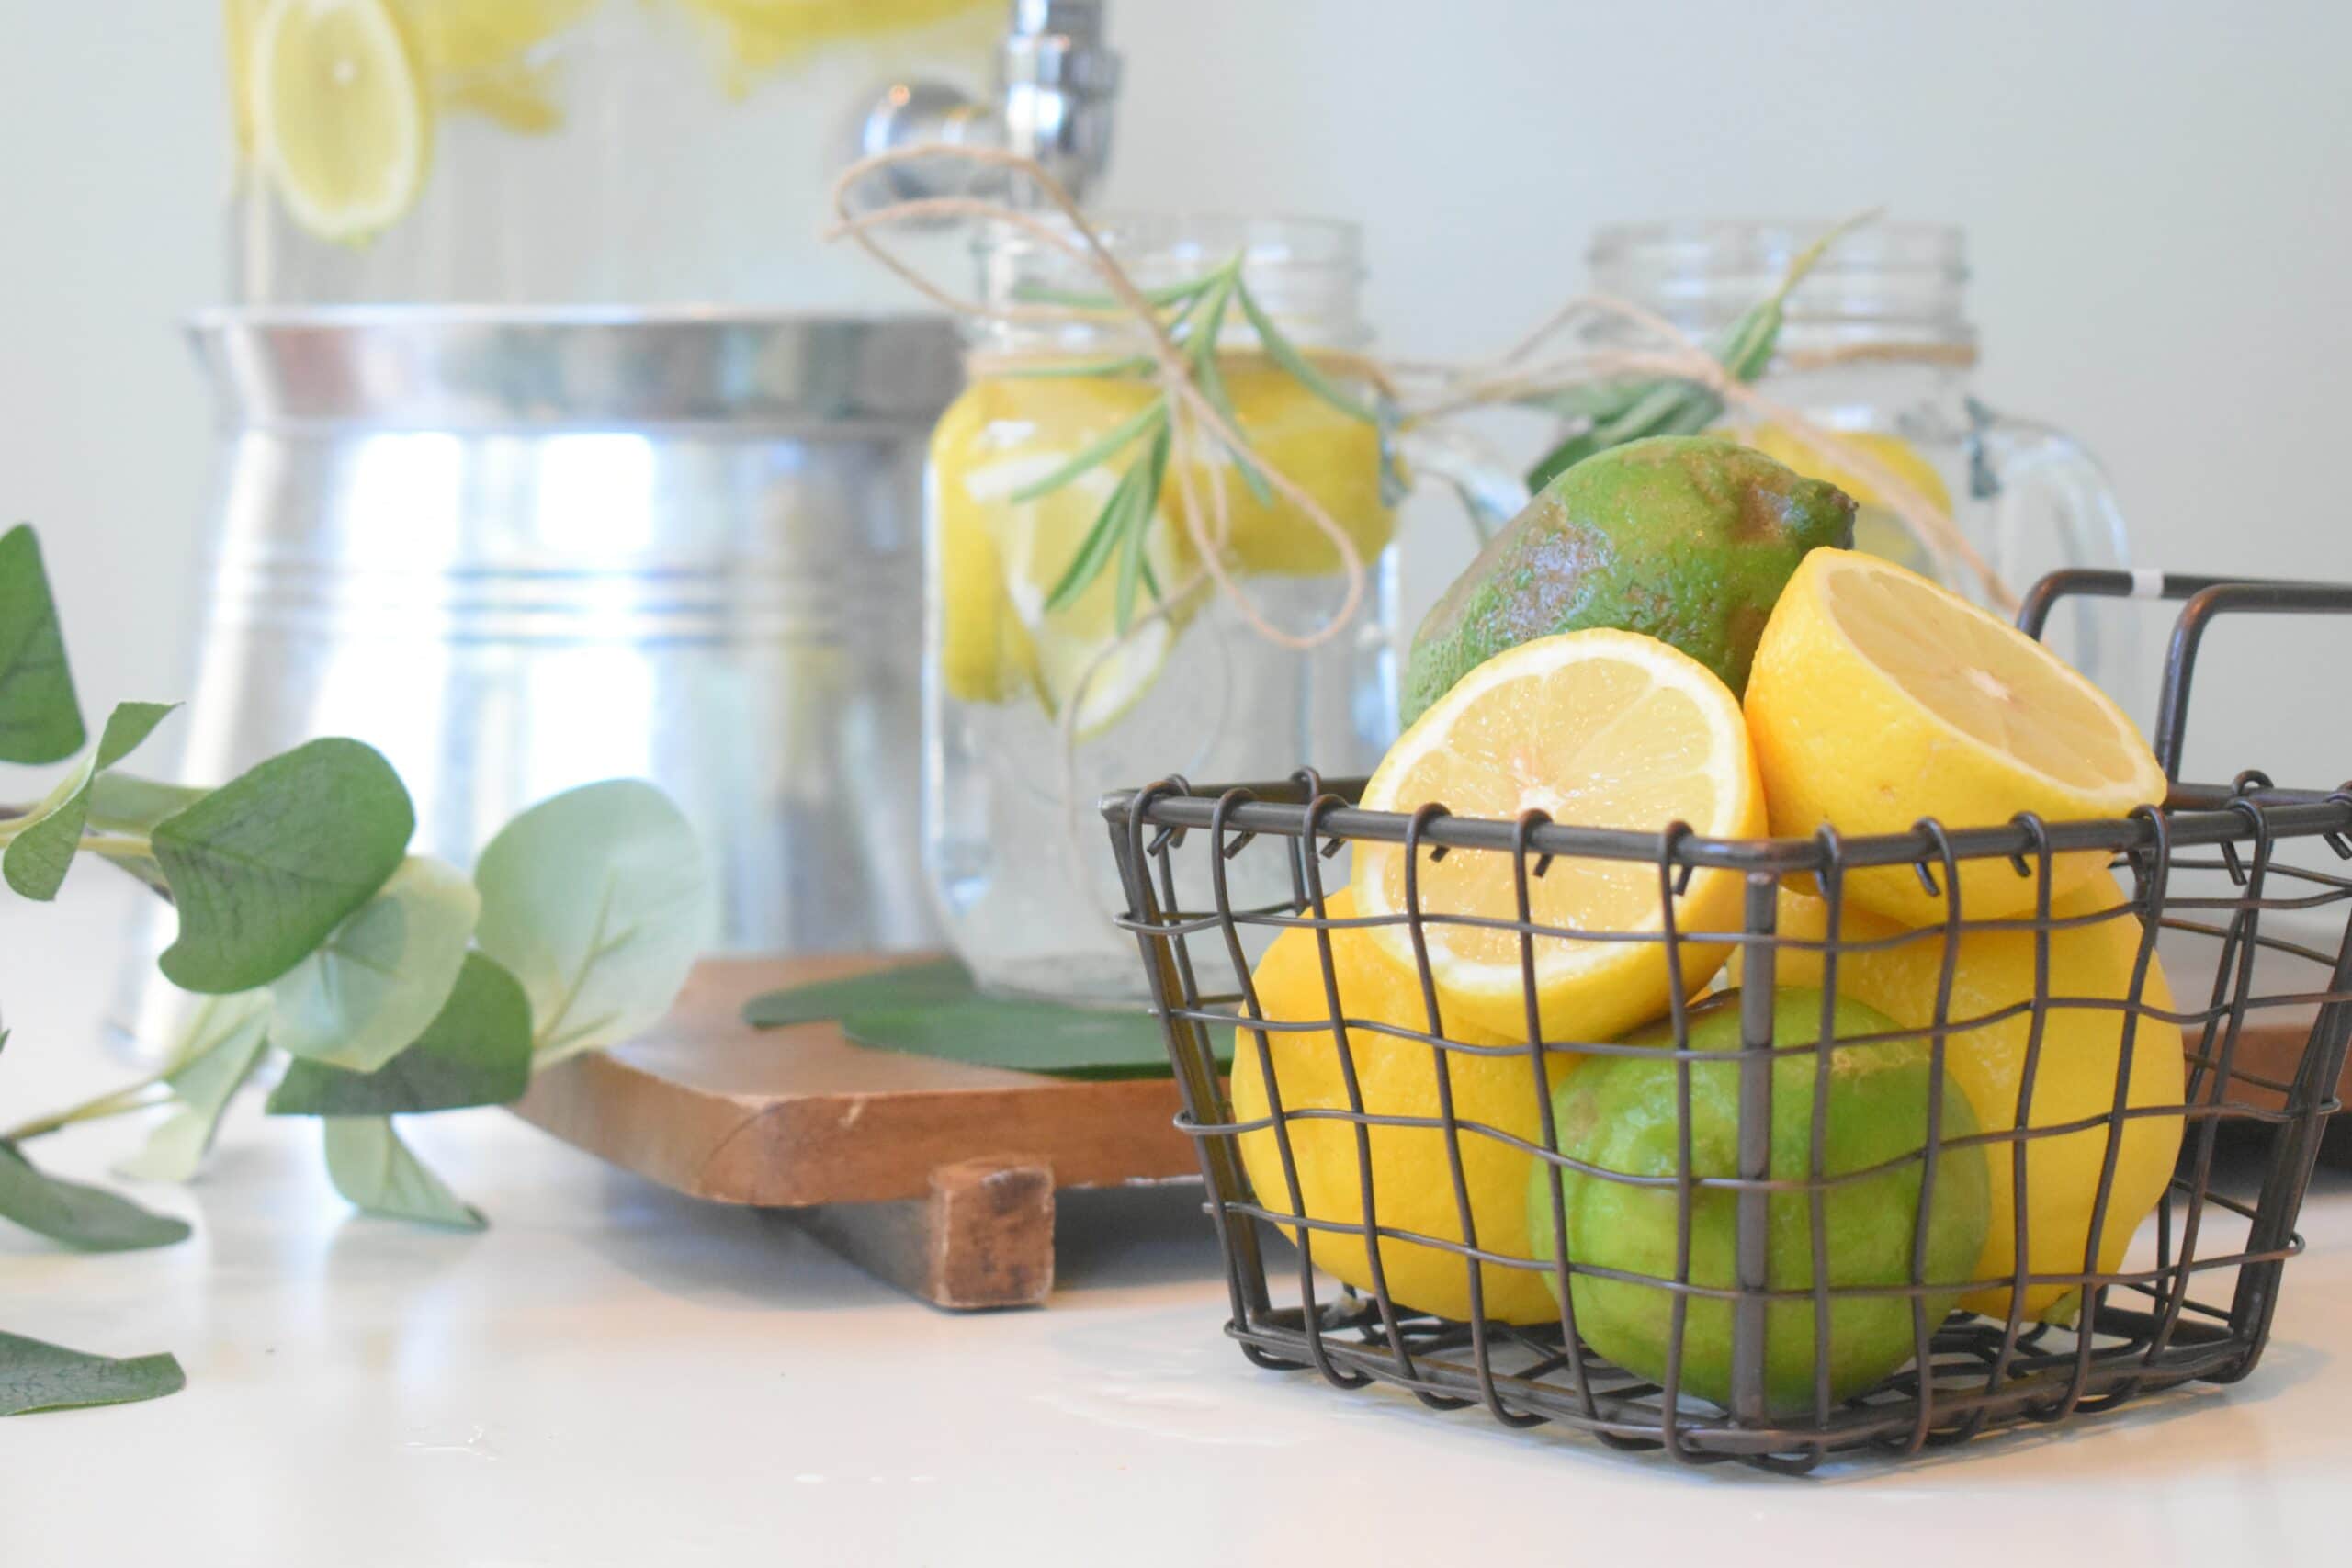 preventing dehydration with water and lemons.